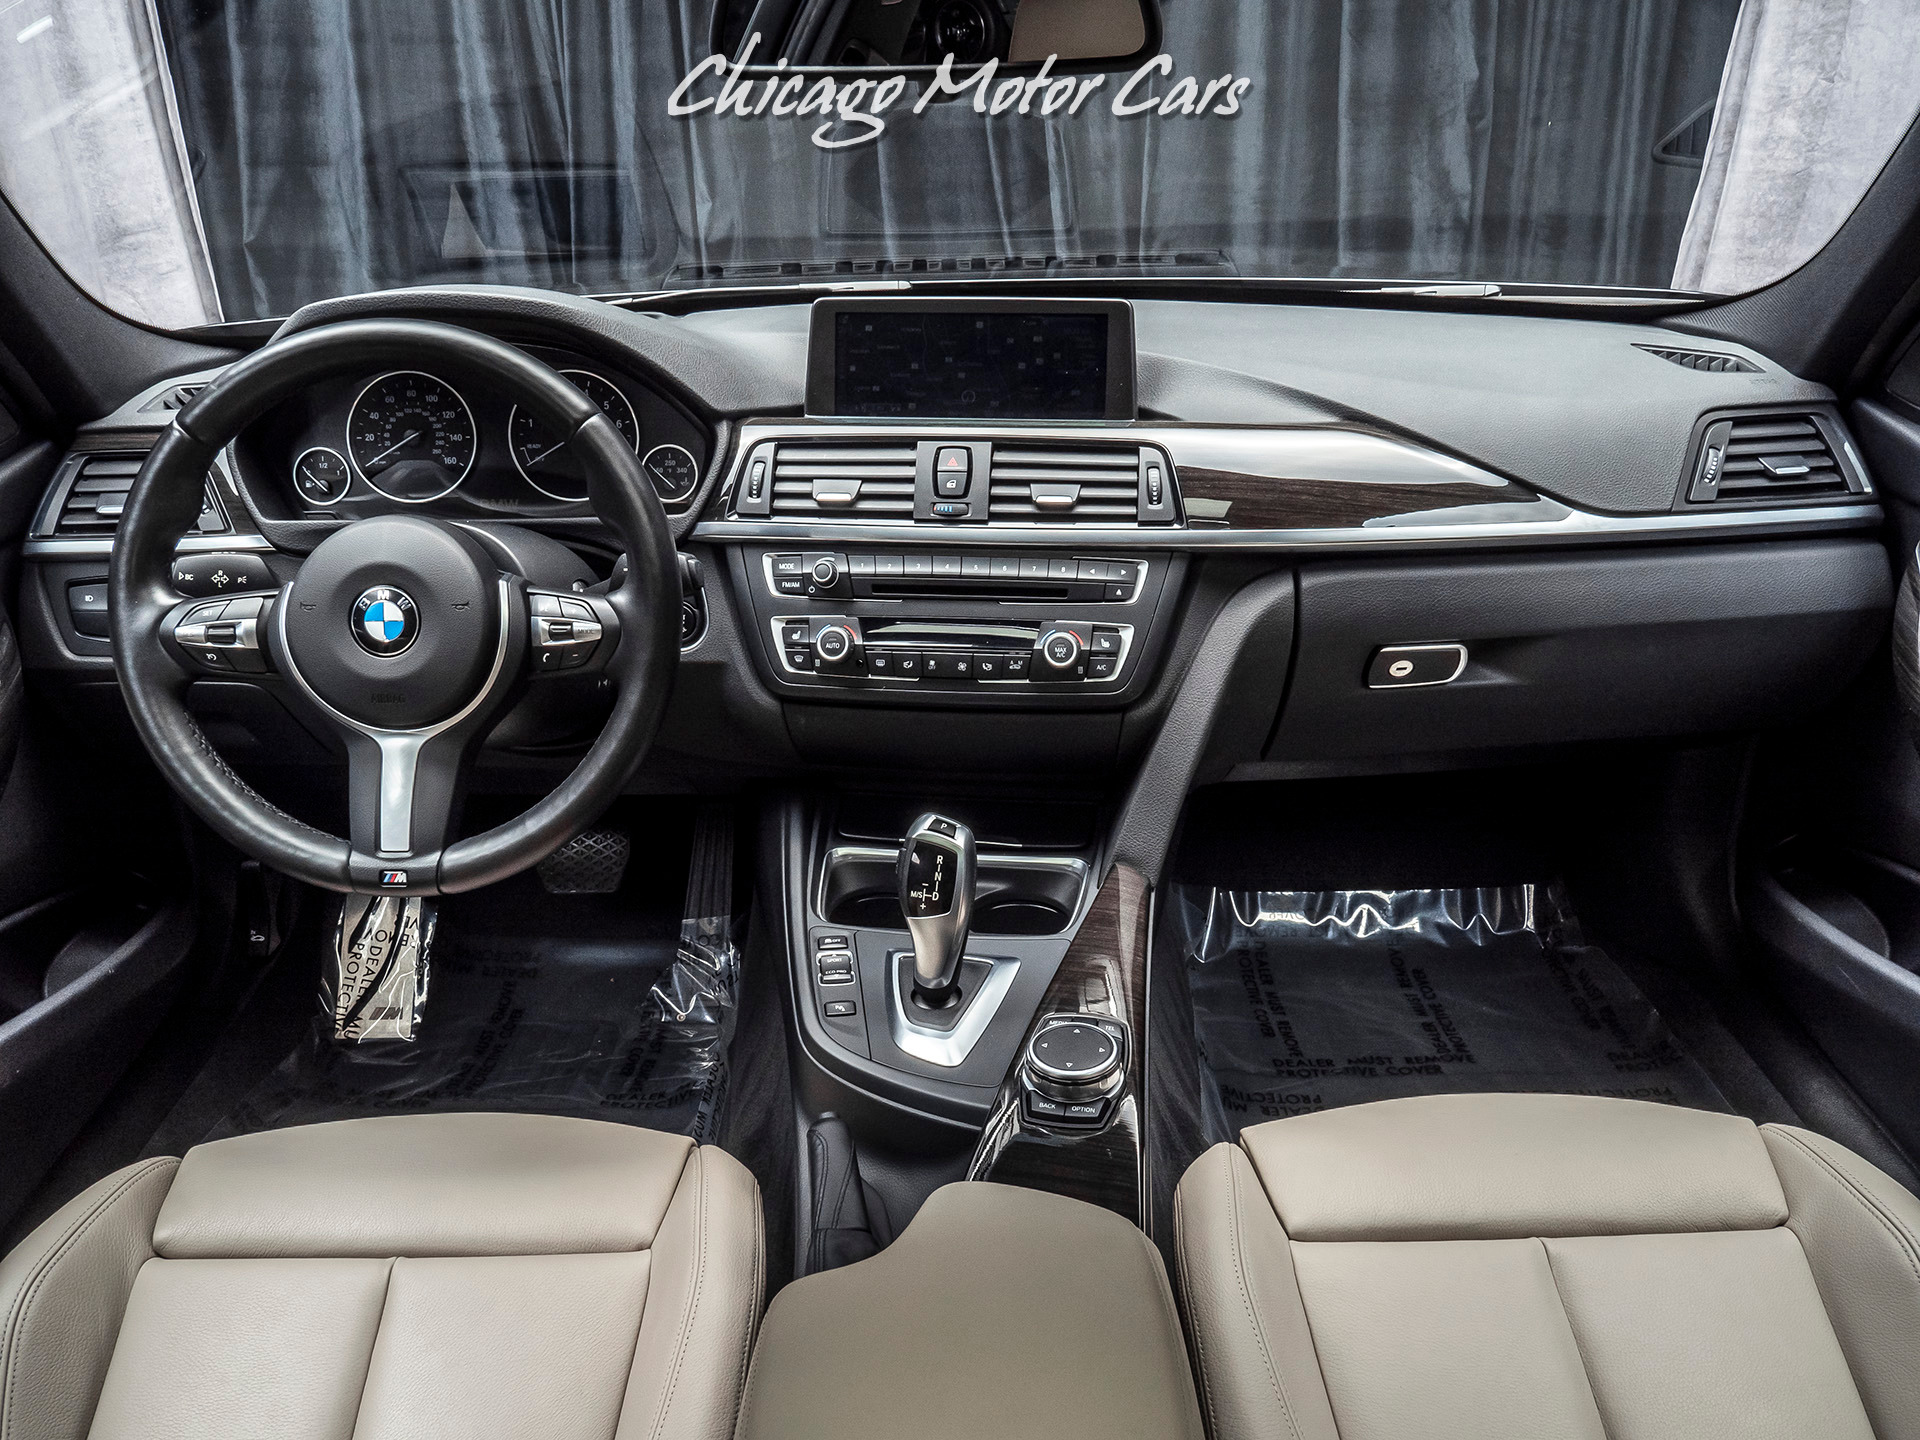 Used 2015 BMW 328i xDrive Sedan M SPORT PACKAGE! For Sale (Special Pricing)  | Chicago Motor Cars Stock #15965